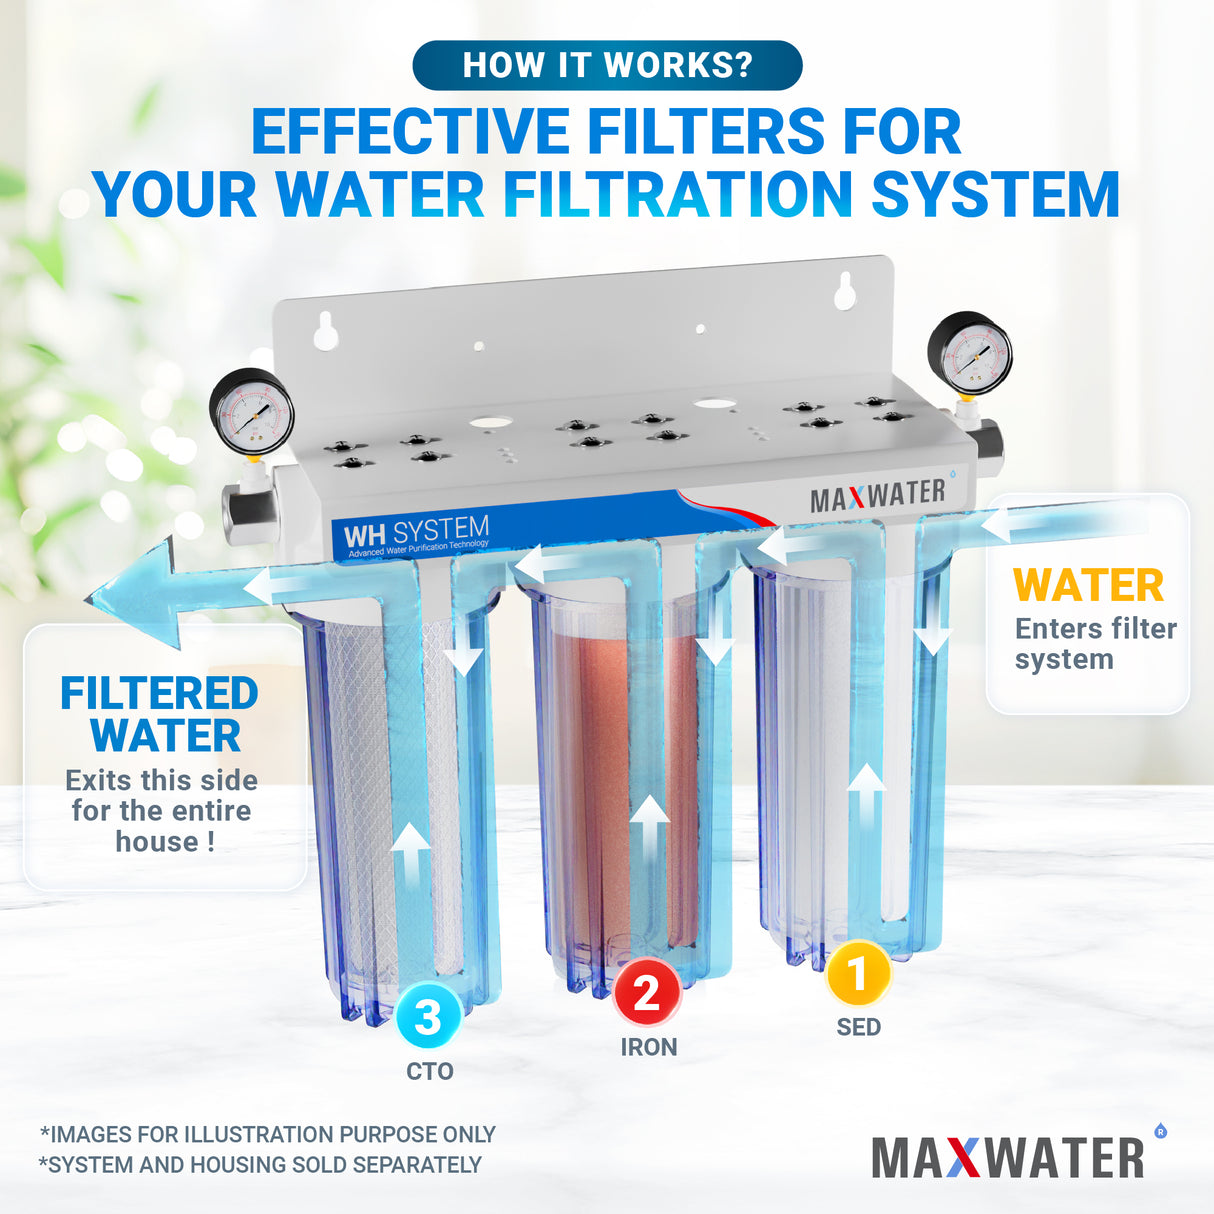 Versatile filtration solution: sediment, iron, and CTO filter replacement cartridge